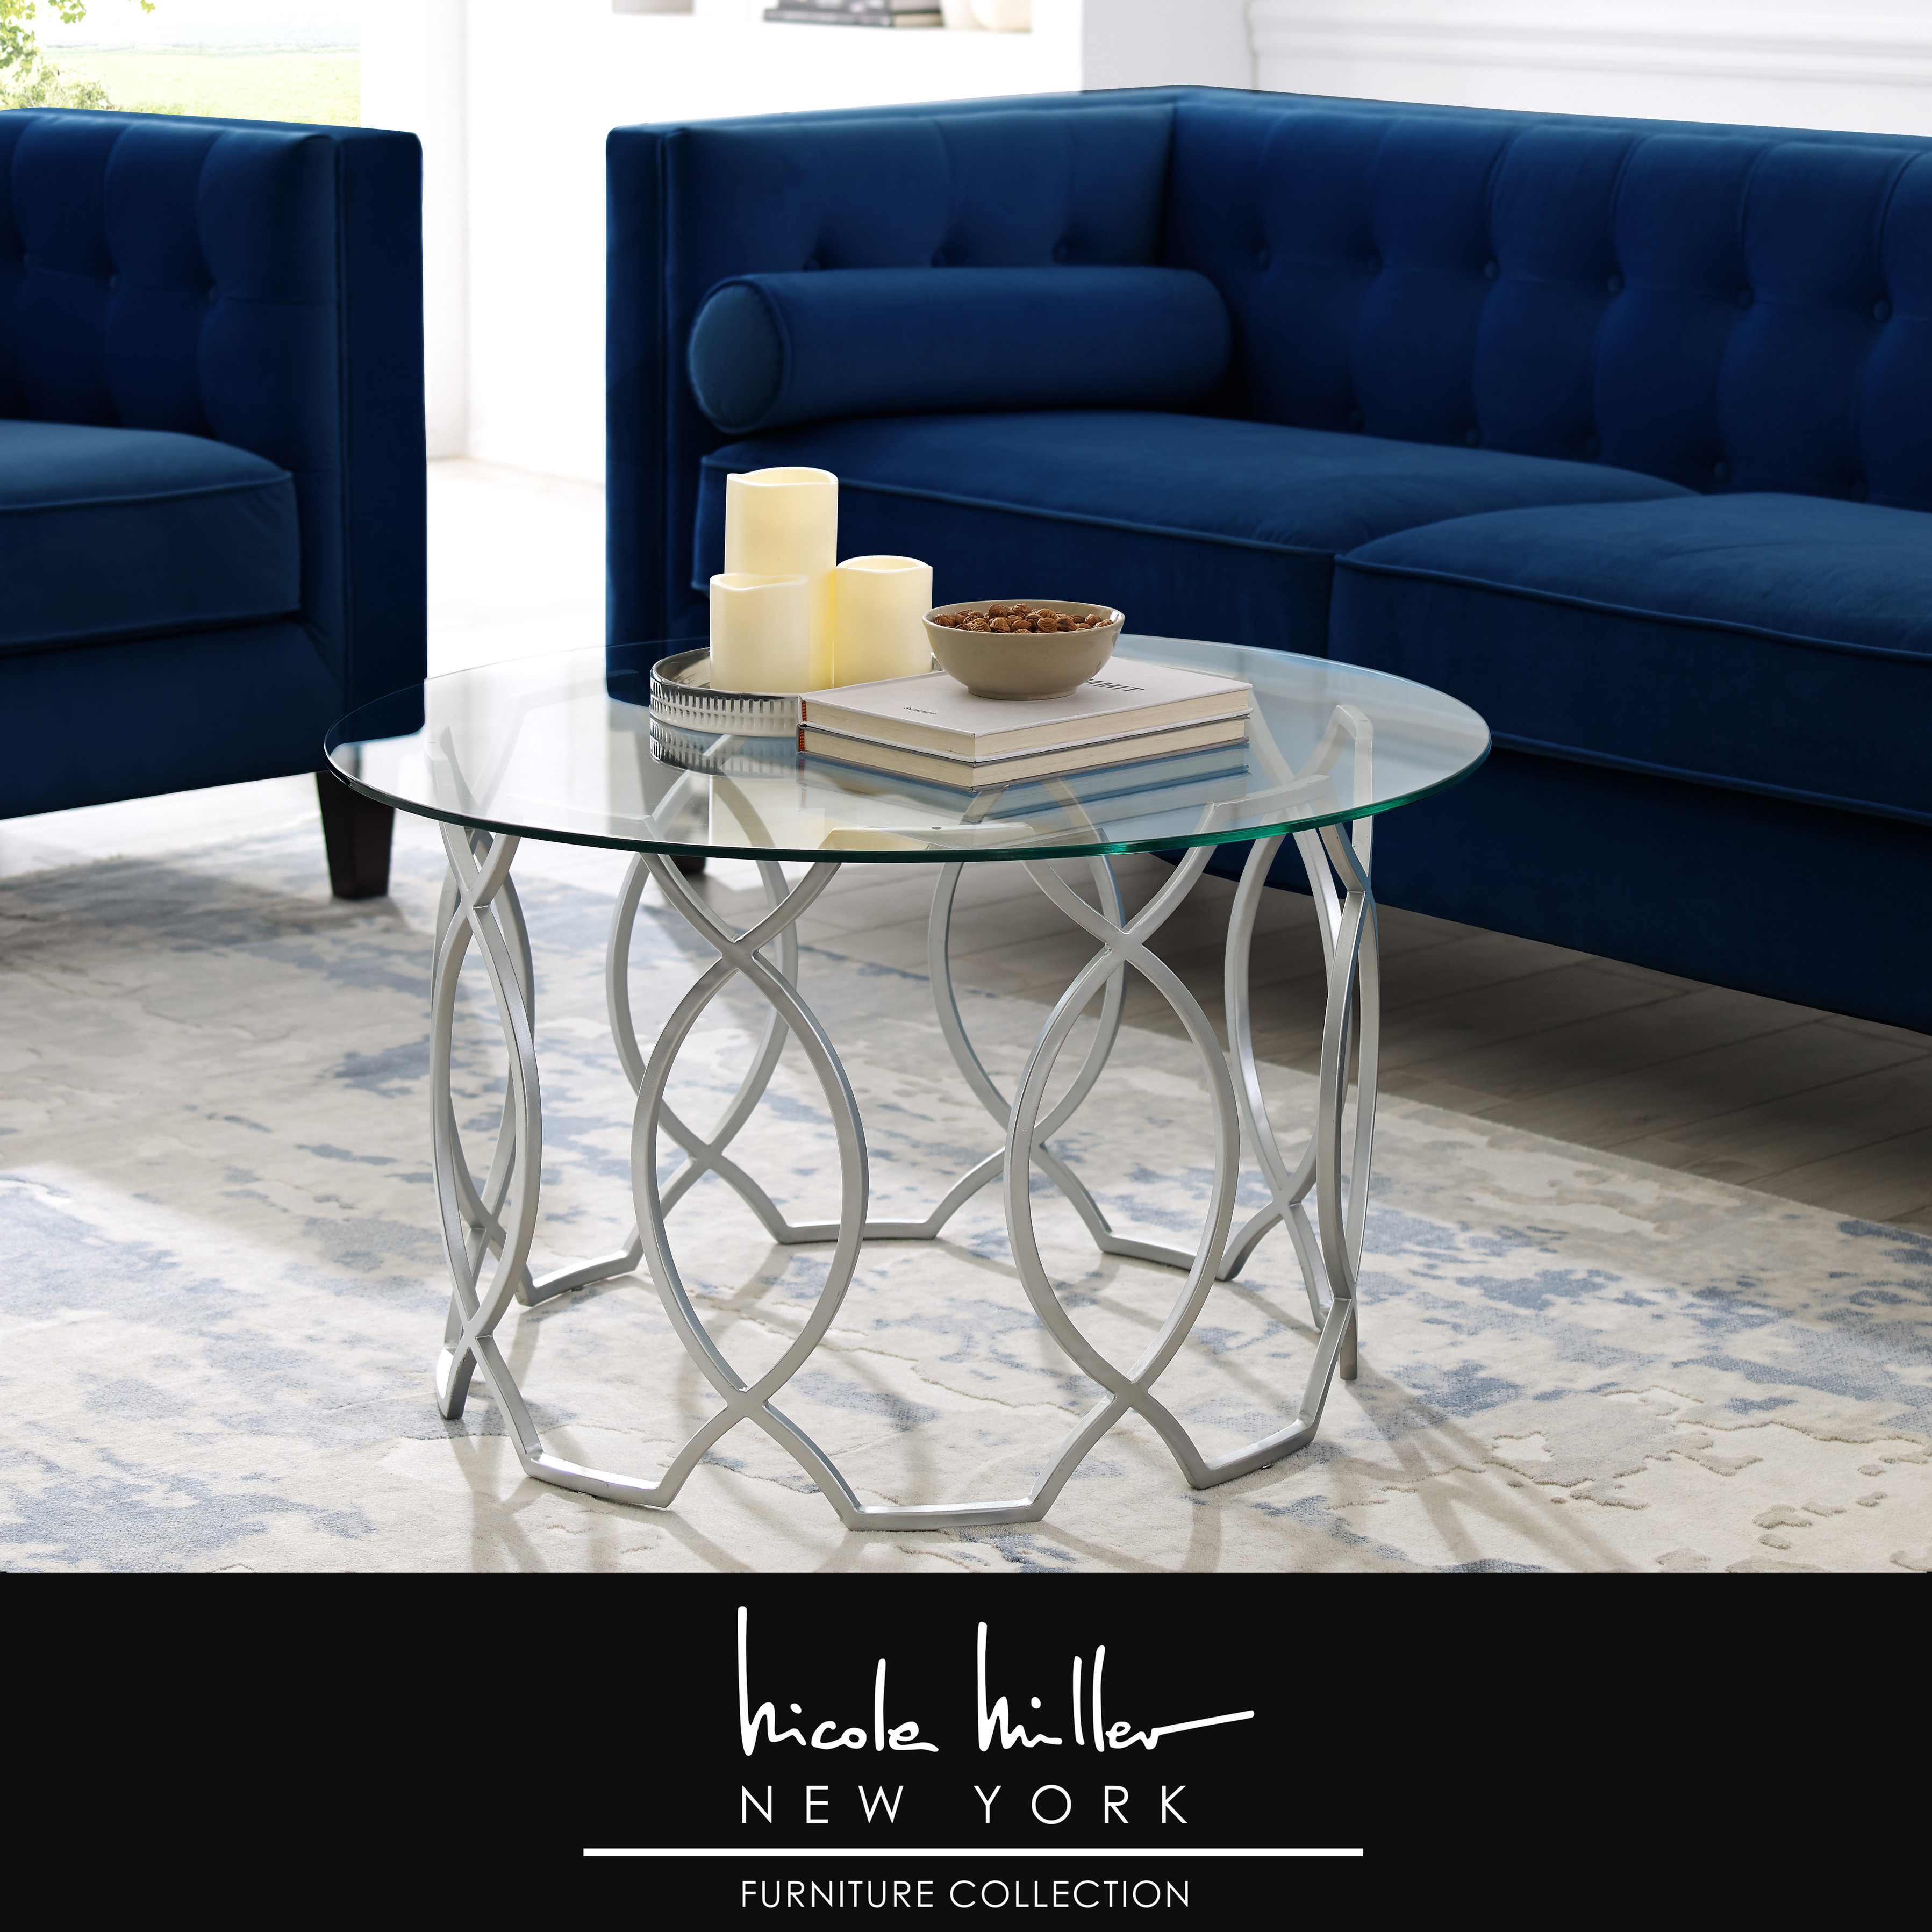 Sikara Round Modern Coffee Table- Durable Clear-Glass Top-Elegant Frame Design-By Nicole Miller - Silver